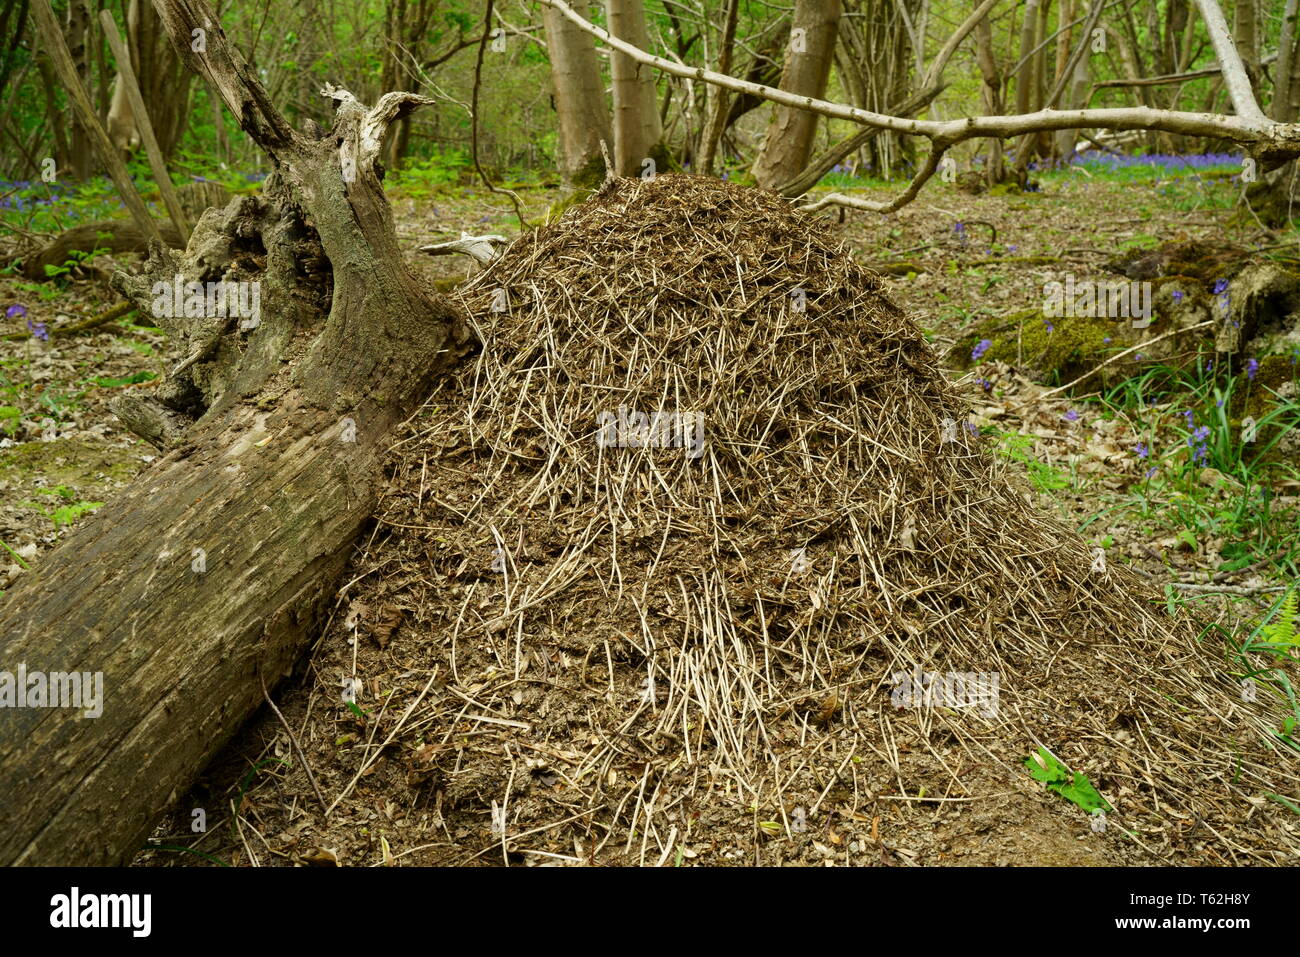 A Wood ants nest built around an old tree stump. Stock Photo